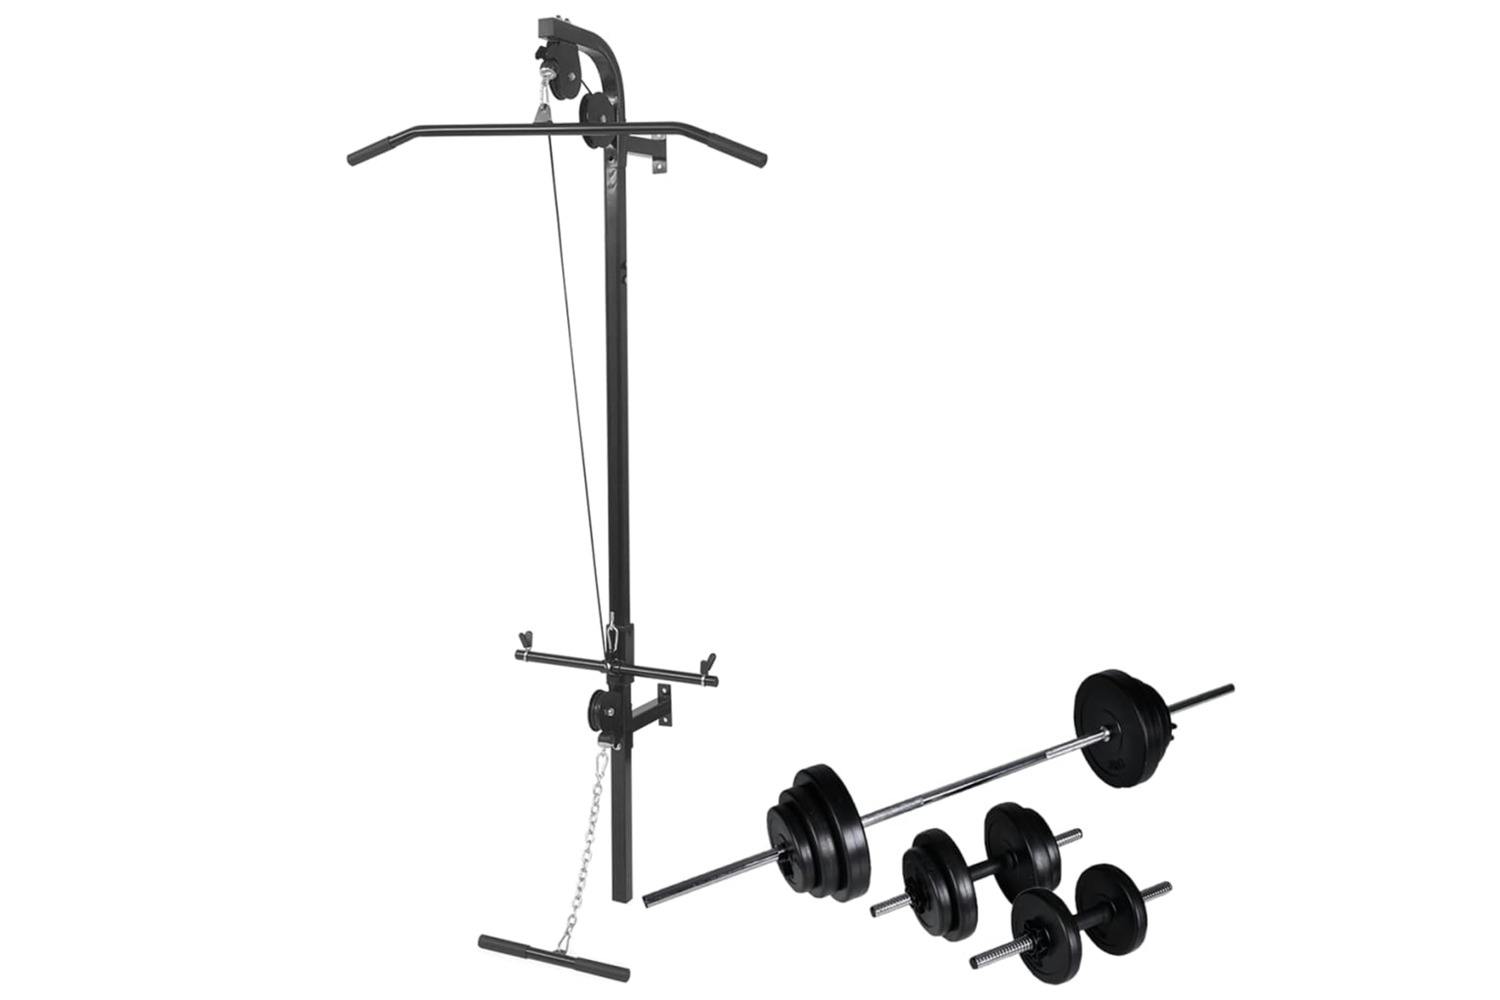 Vidaxl 275358 Wall-mounted Power Tower With Barbell And Dumbbell Set 30.5 Kg